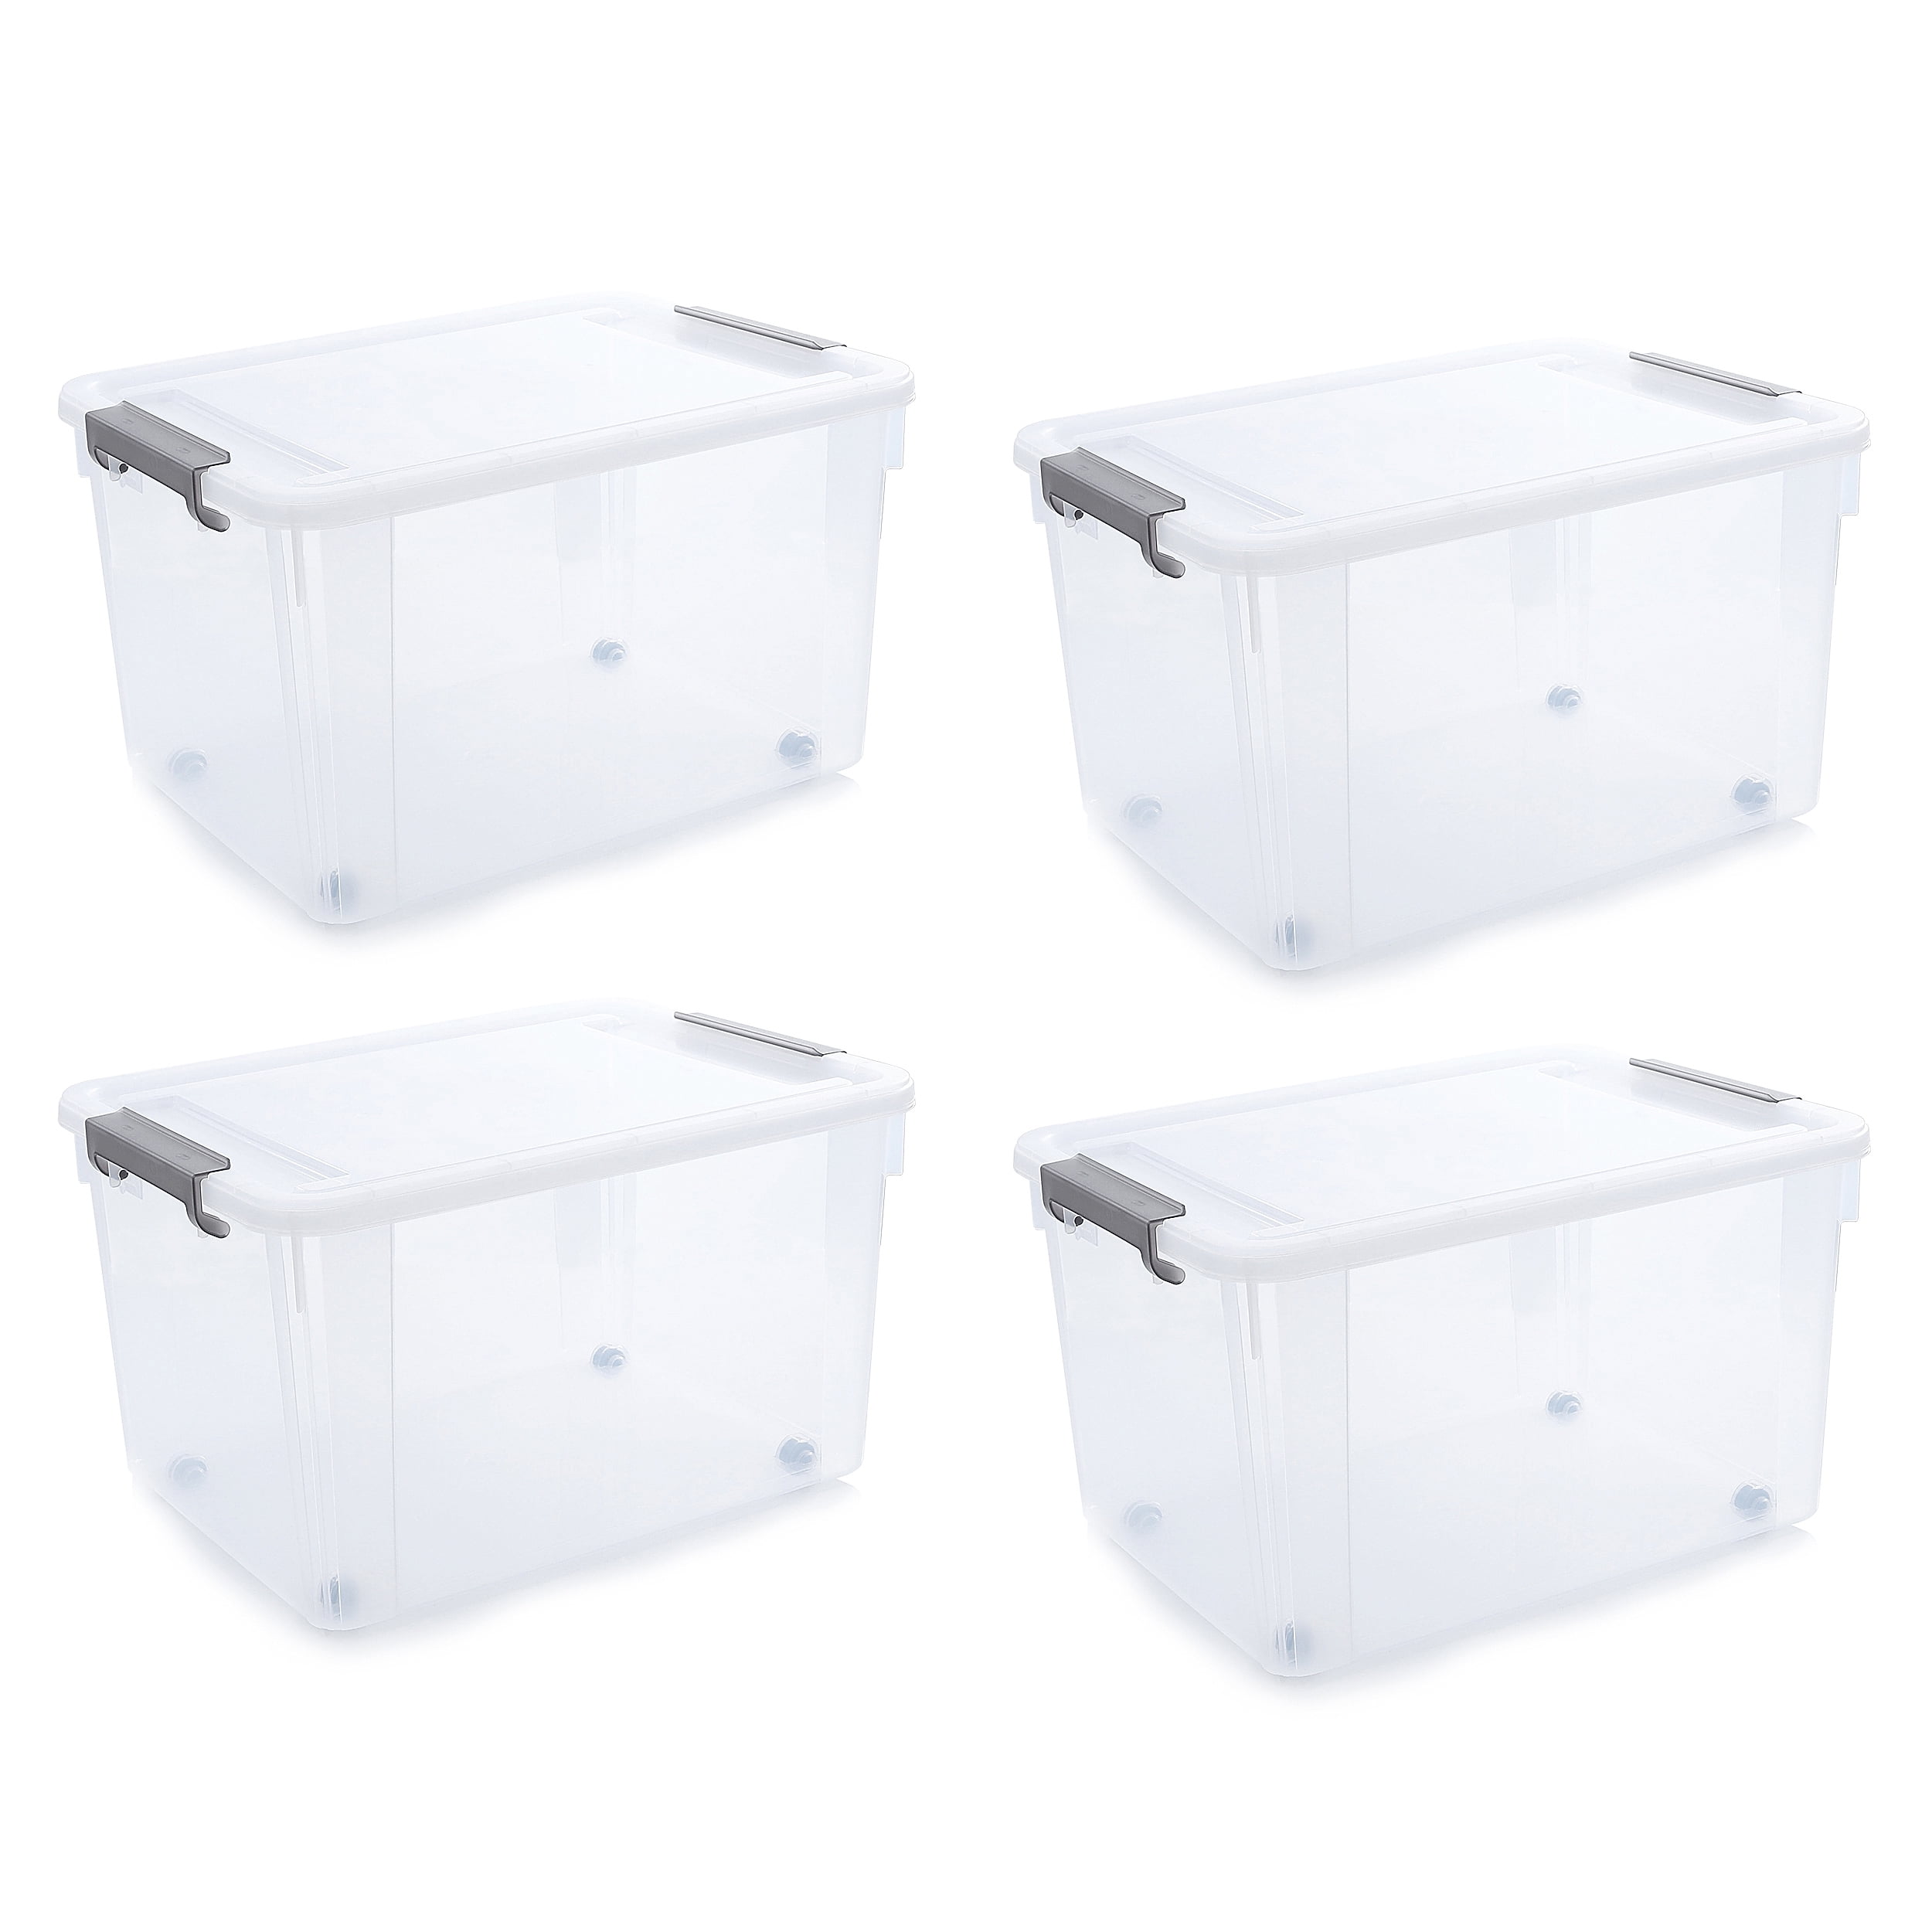  jioko 17 QT Plastic Storage Container Bins with Secure Latching  Lid, Stackable Storage Box for Organizing Large Clear Storage Tote, 6 Packs